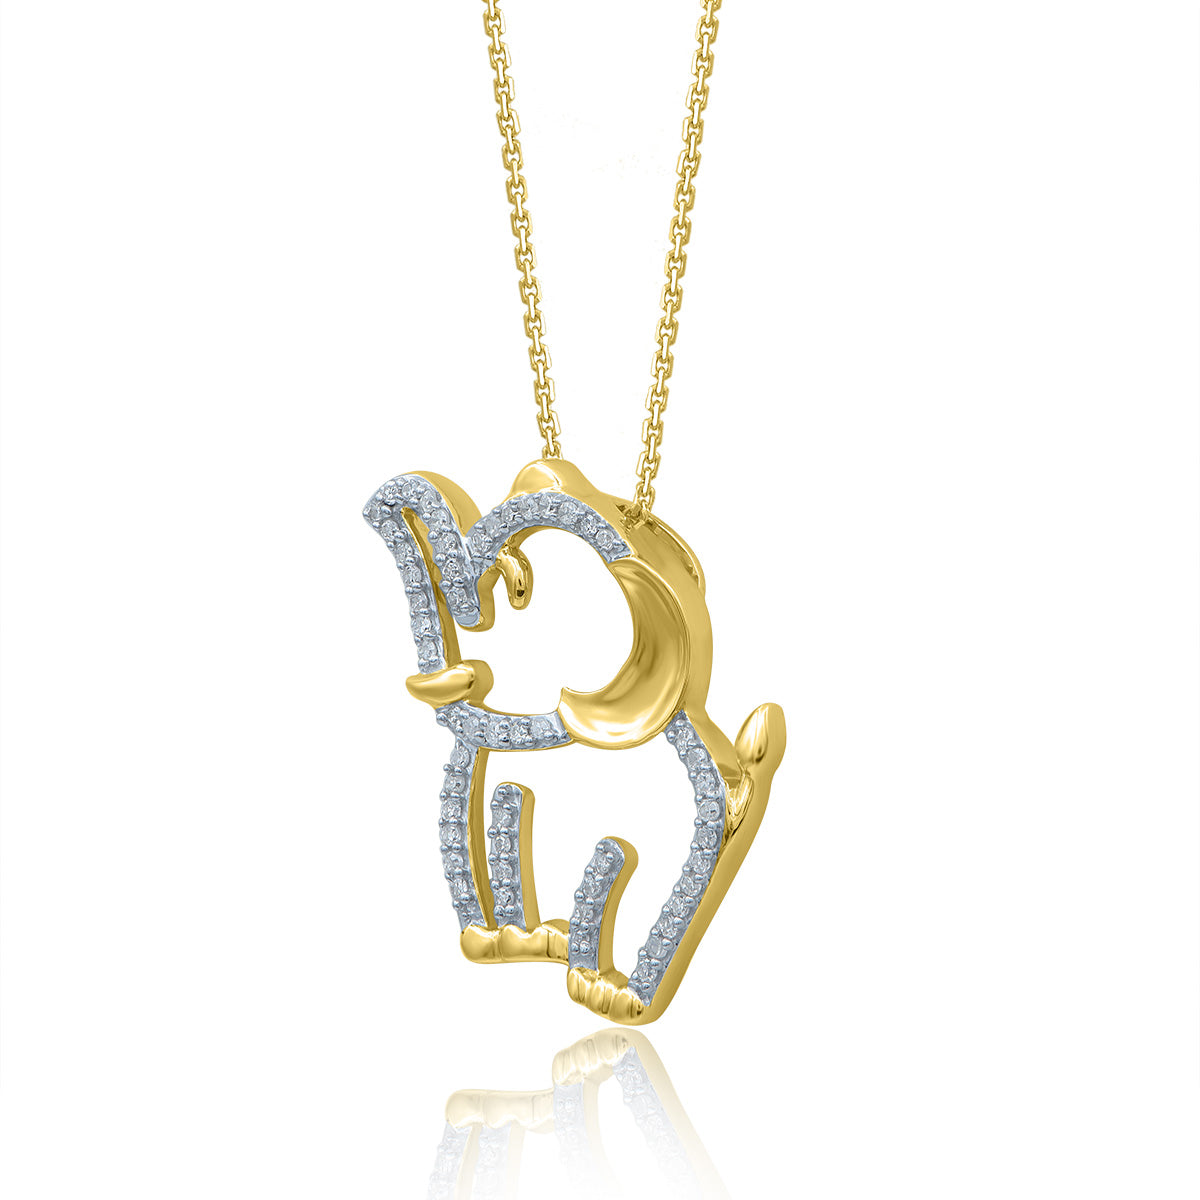 Elephant Pendant Necklace in 925 Sterling Silver